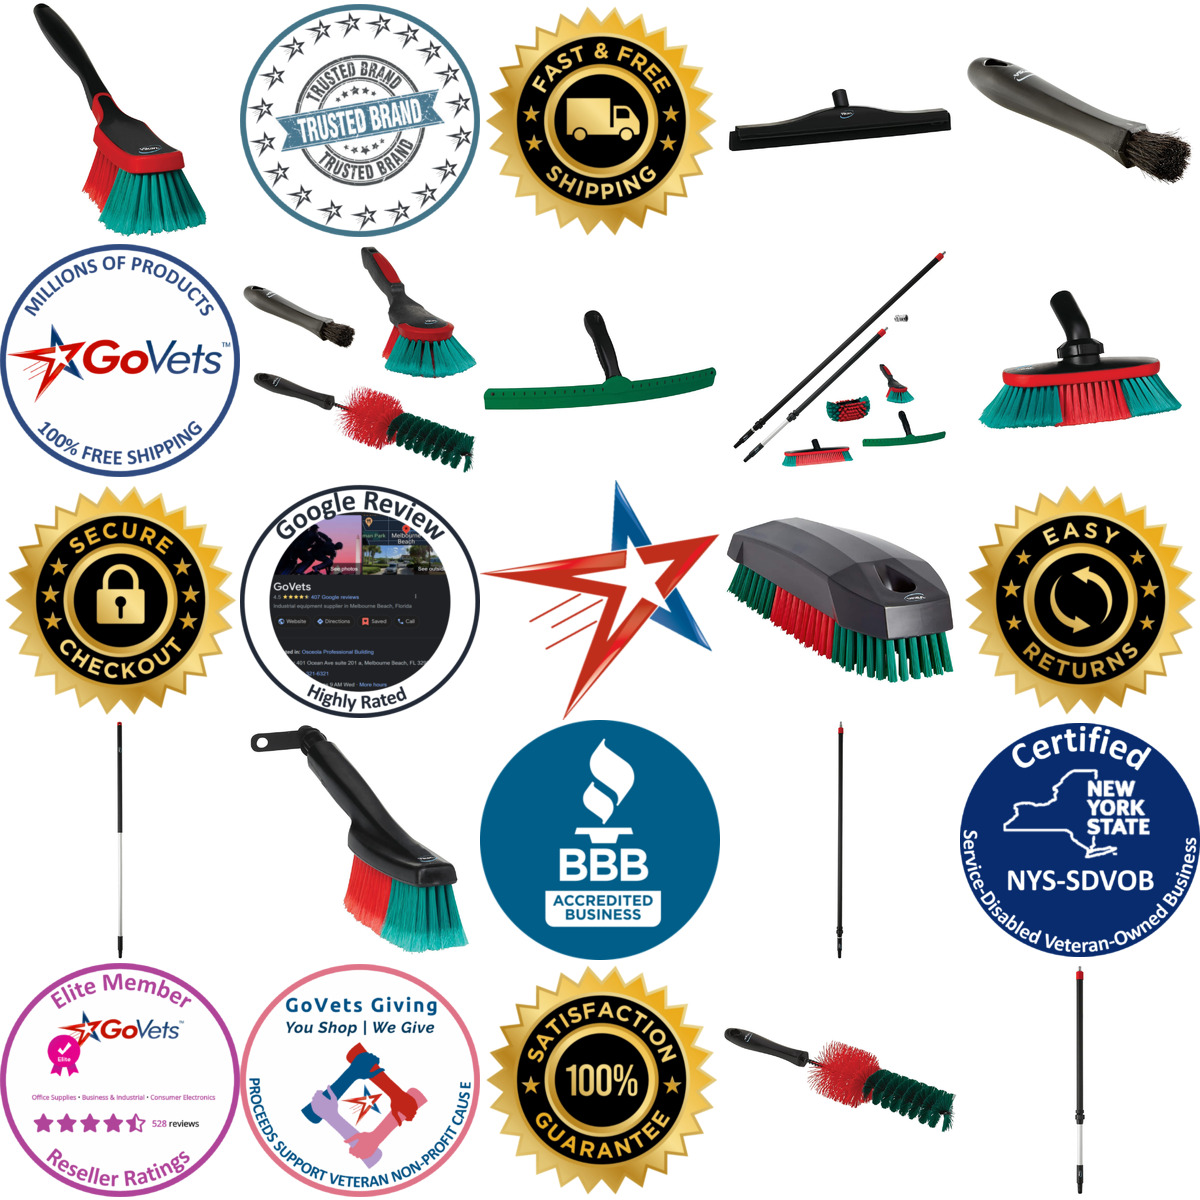 A selection of Cleaning and Finishing Brushes products on GoVets